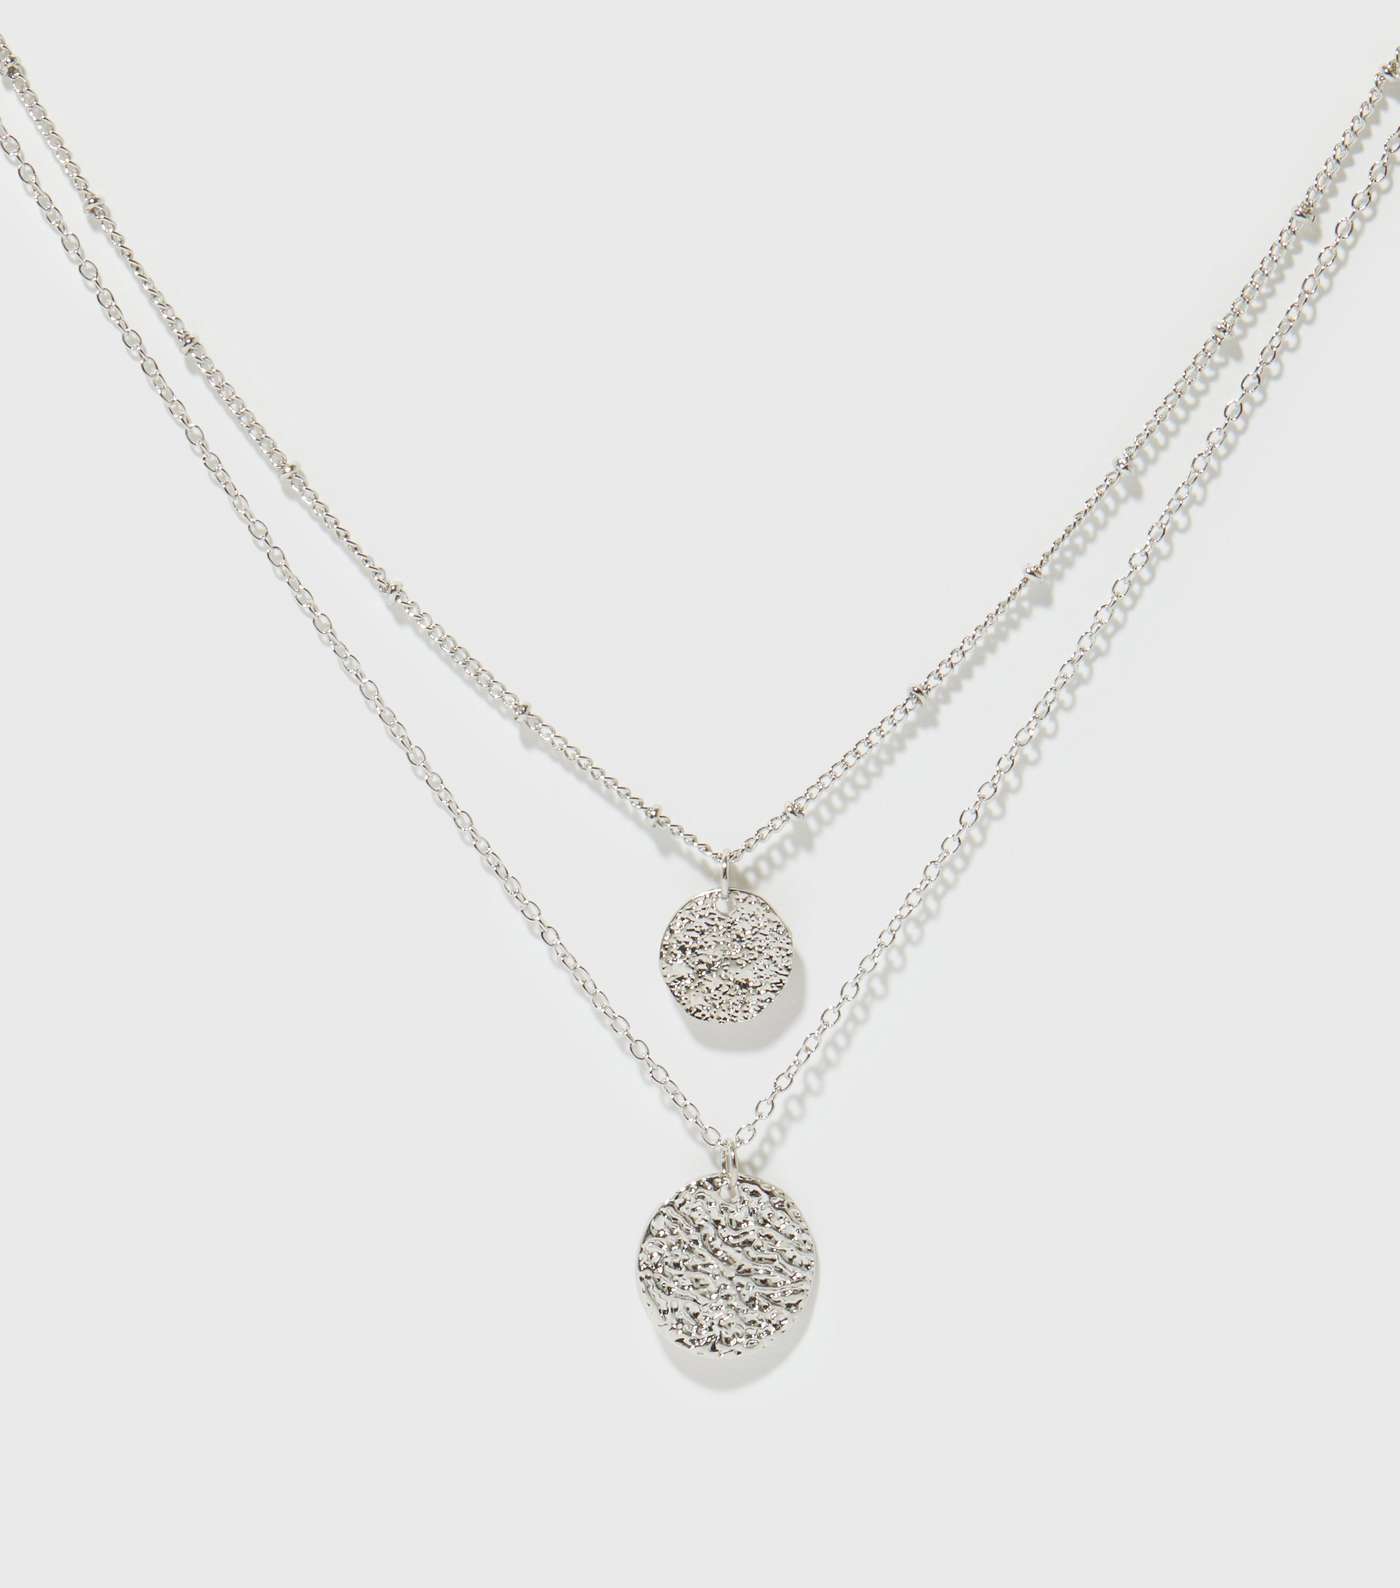 Silver Beaten Disc Pendant Layered Necklace